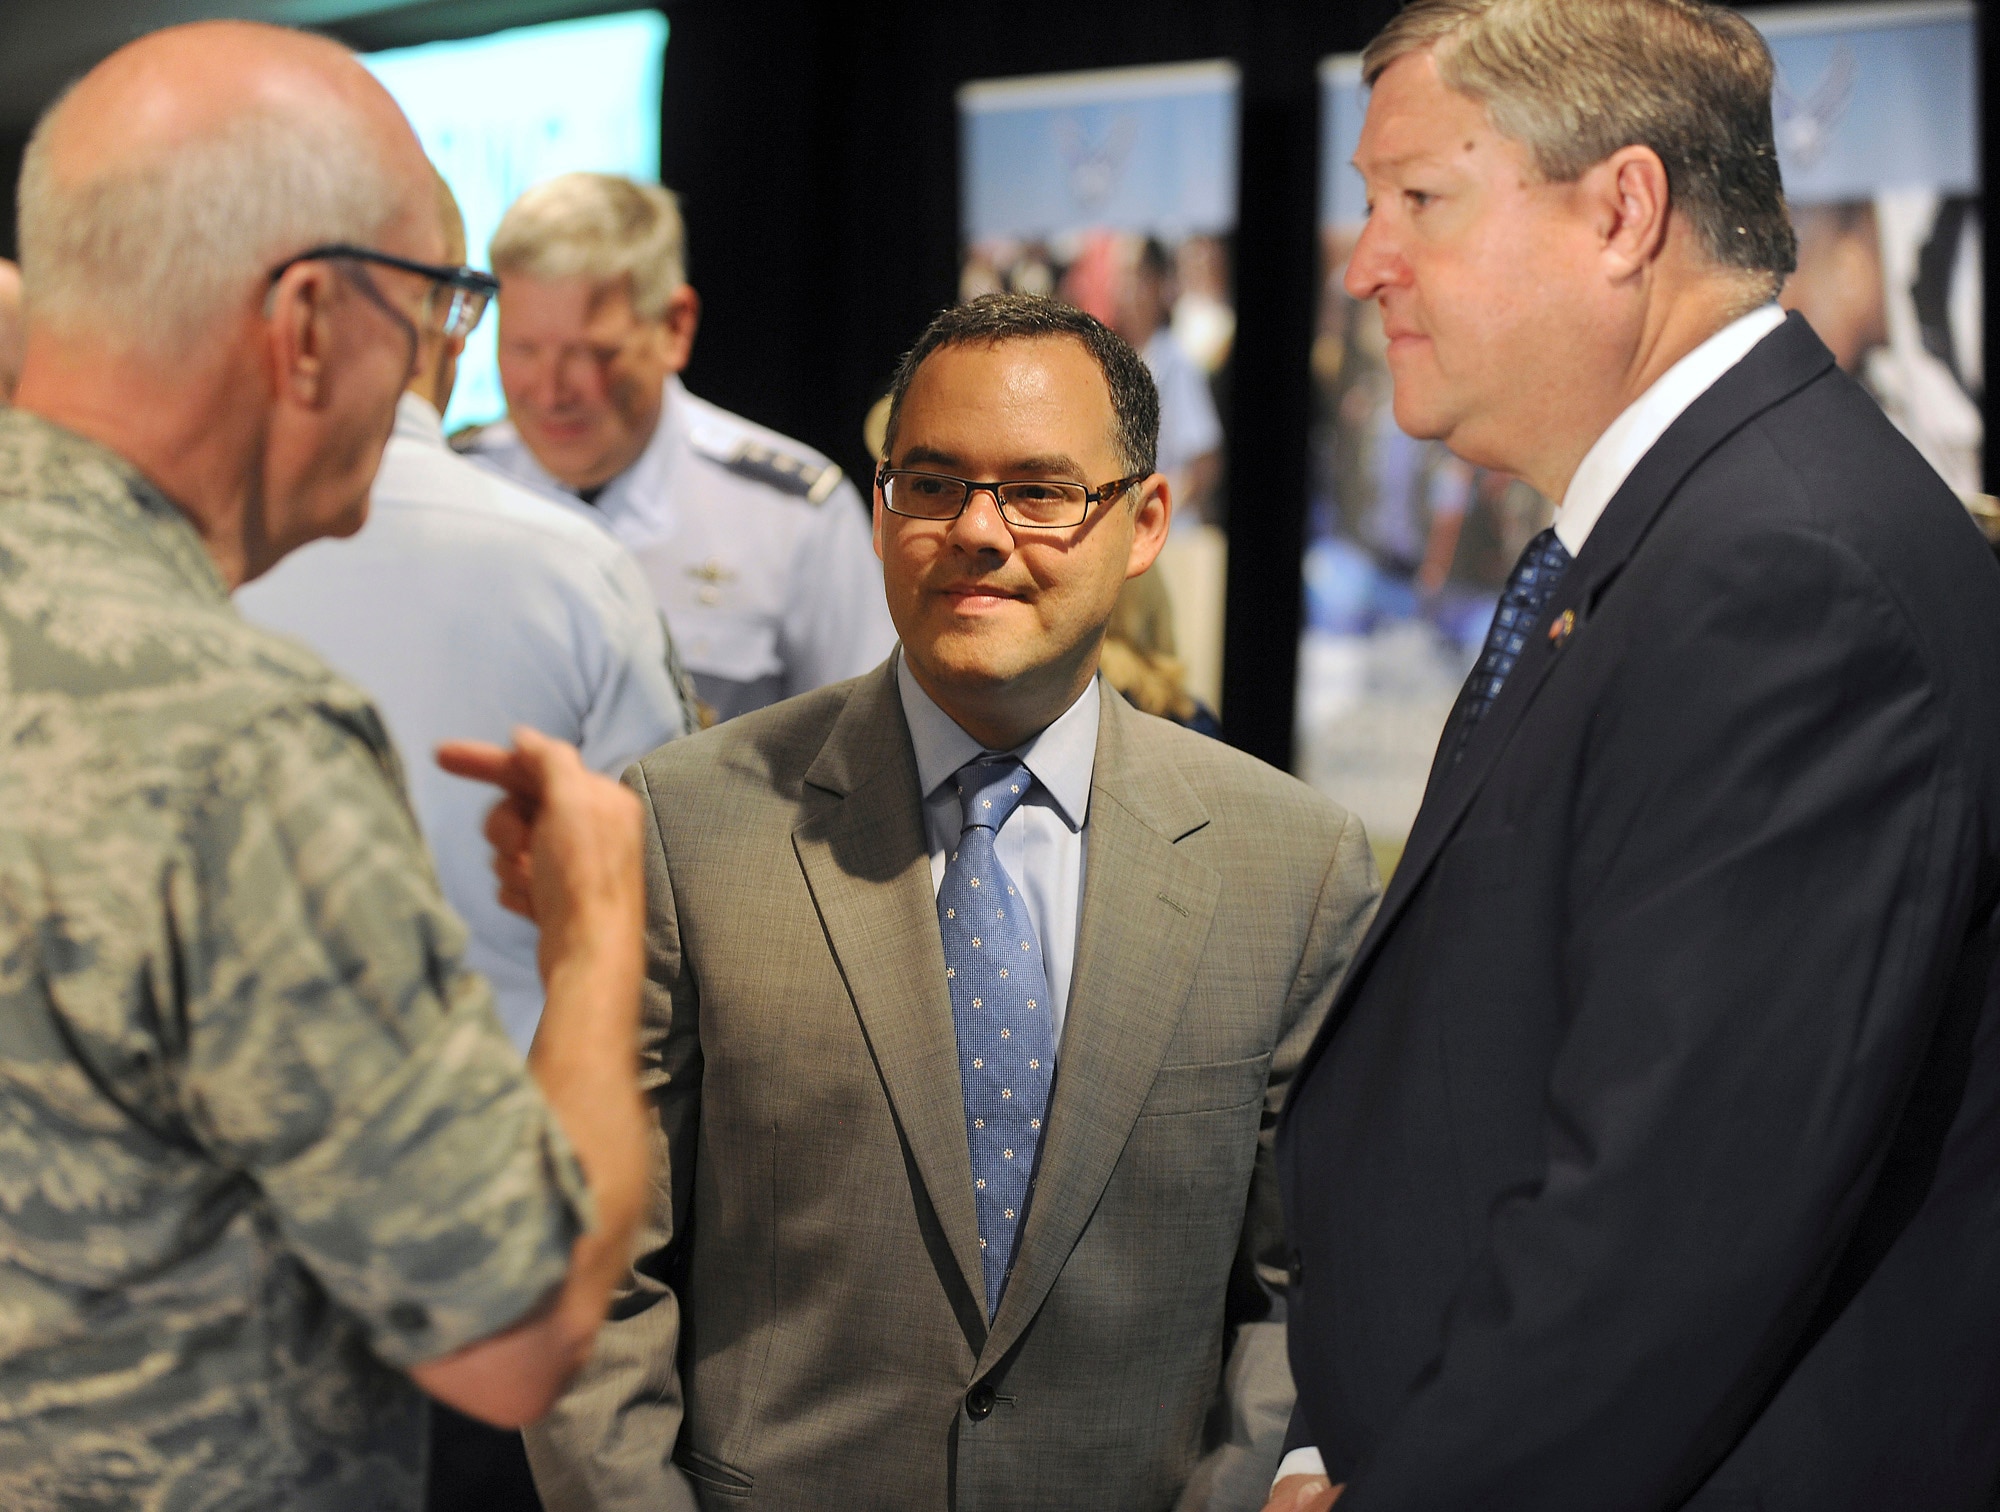 Secretary of the Air Force Michael Donley (right) and Assistant Secretary of the Air Force for Manpower and Reserve Affairs Daniel Ginsberg visit with Maj. Gen. Cecil Richardson, Air Force chief of chaplains, during the Caring for People forum July 19, 2011, in Arlington, Va. Donley made the opening remarks for the three-day event. (U.S. Air Force photo/Scott M. Ash)